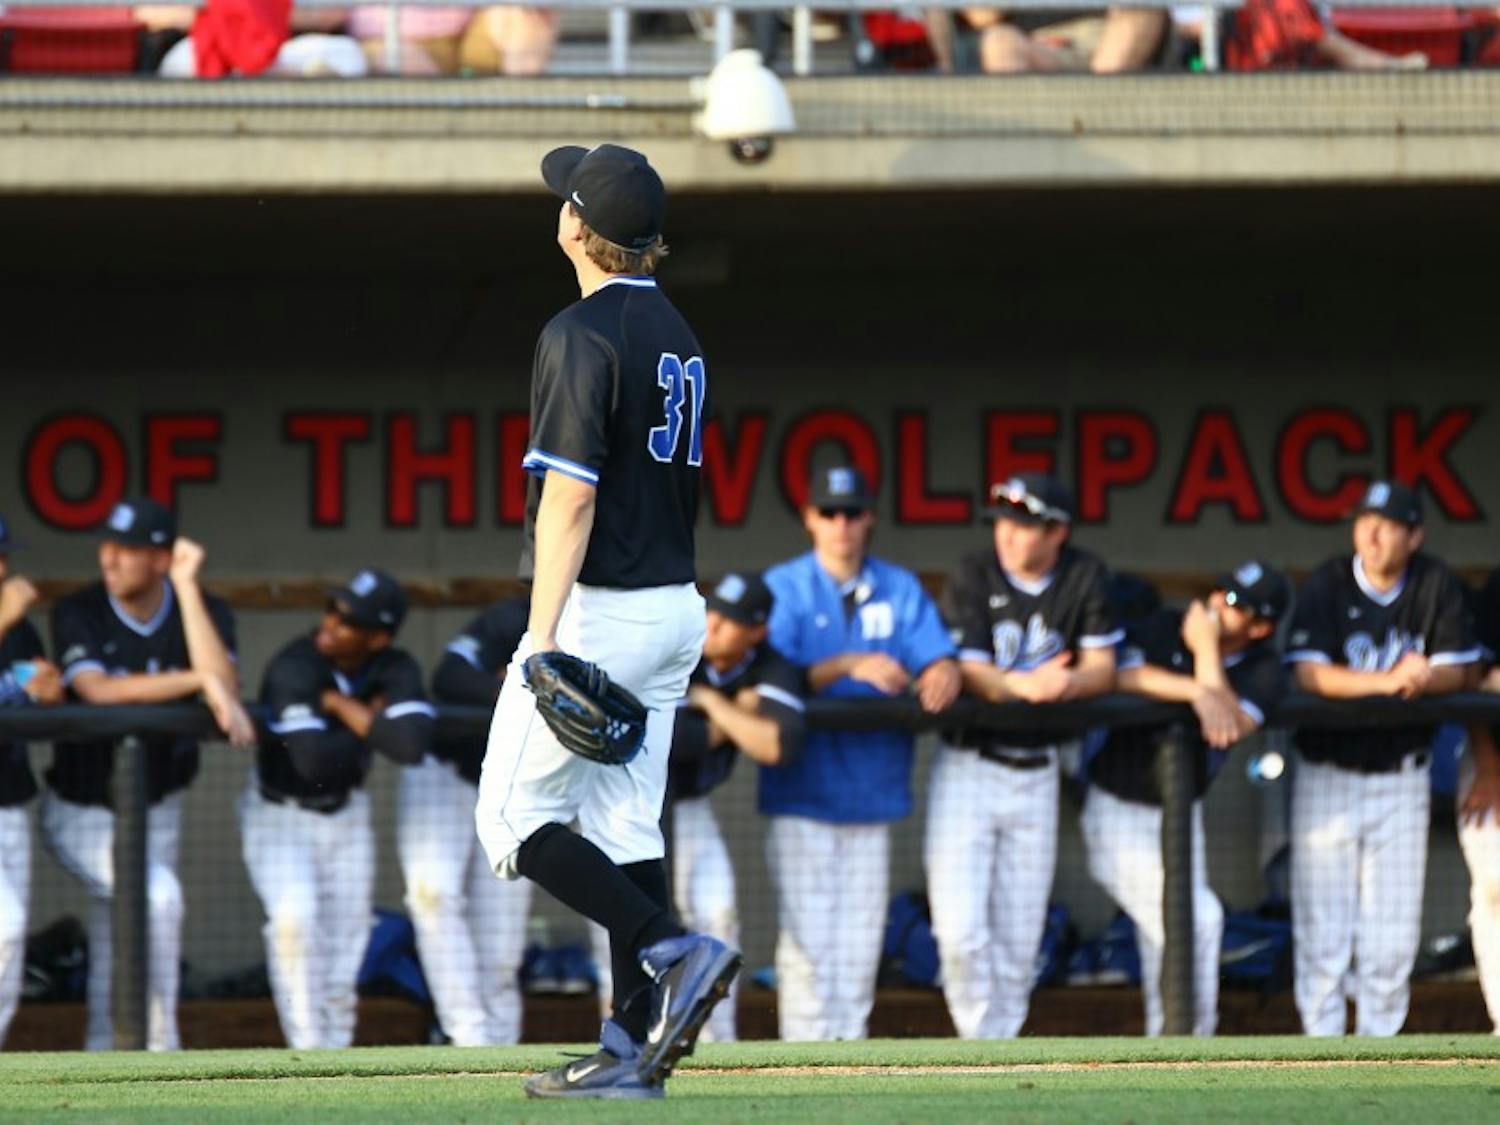 Graduate student Kellen Urbon&nbsp;pitched a career-high 7.1 innings Friday night and exited with a 2-1 lead, but the Blue Devils were unable to keep N.C. State's offense at bay late.&nbsp;